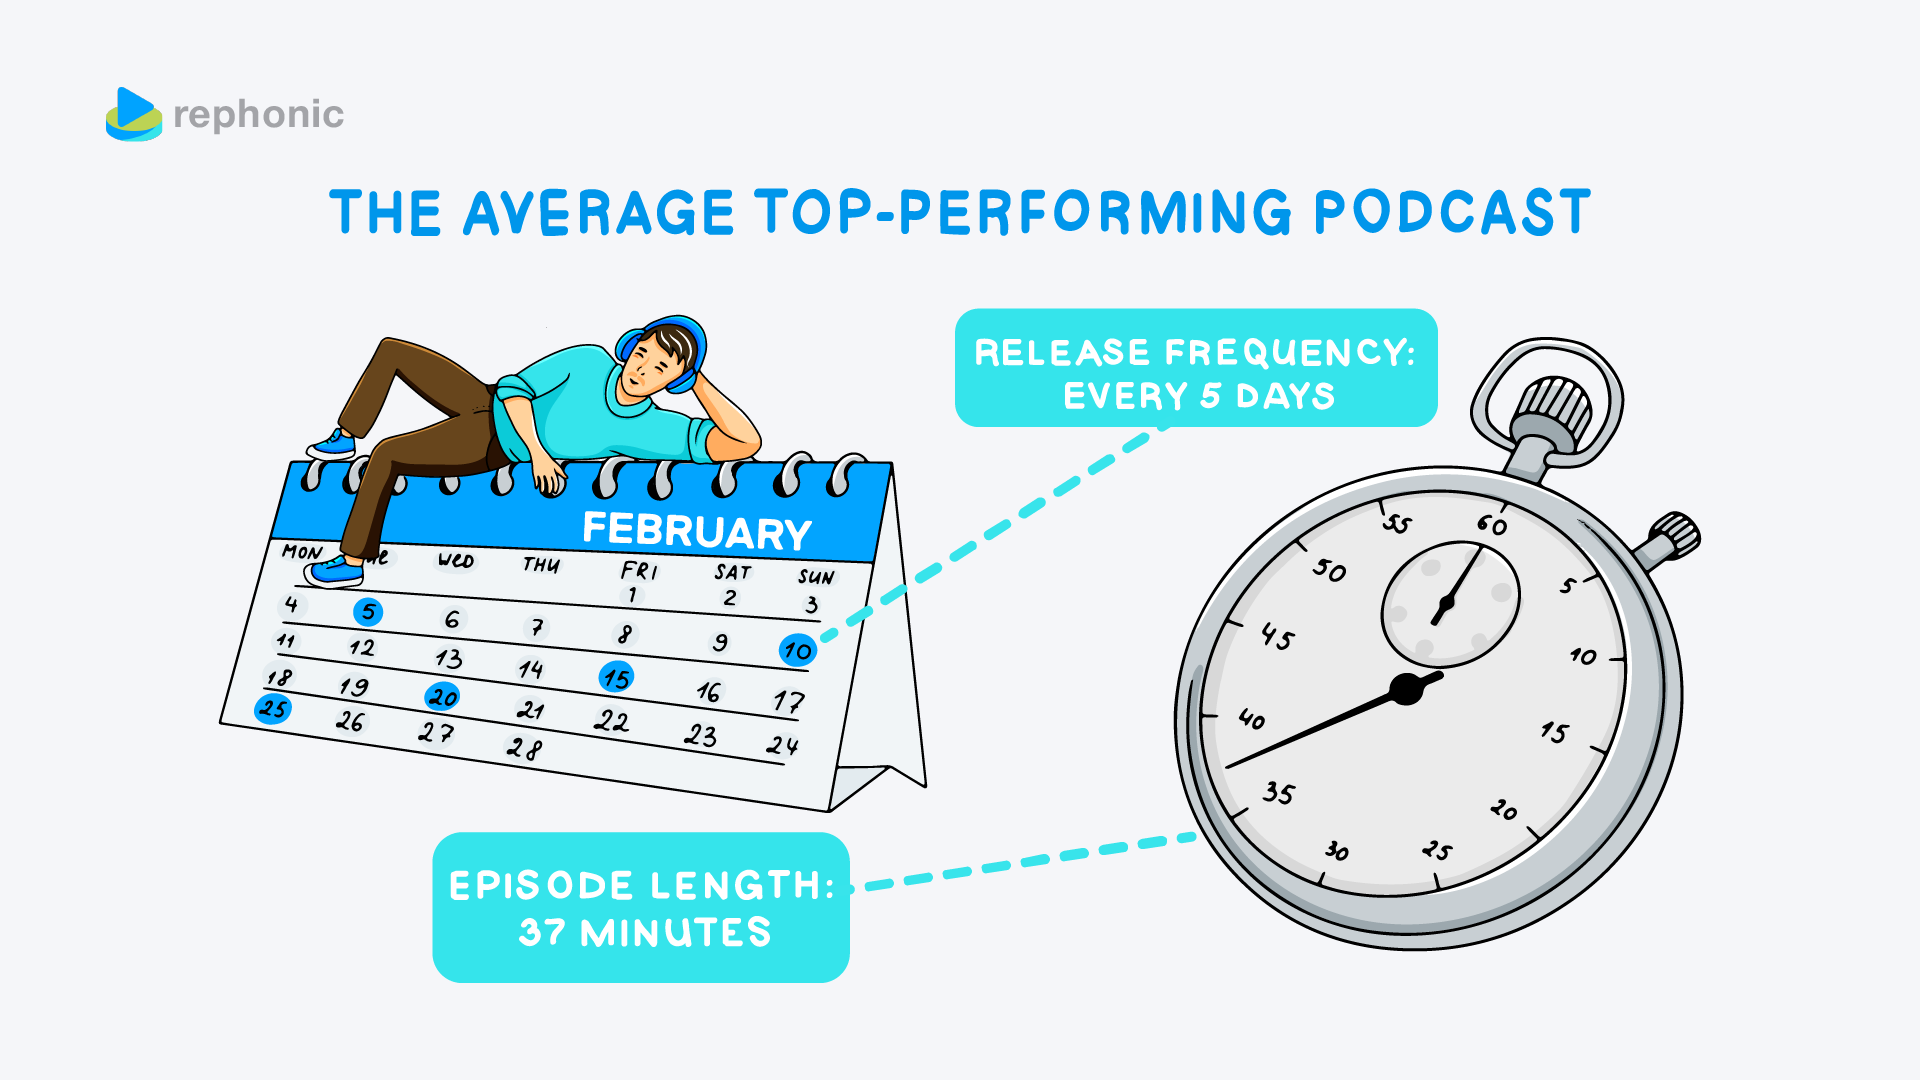 Podcast episode length and release frequency of top shows